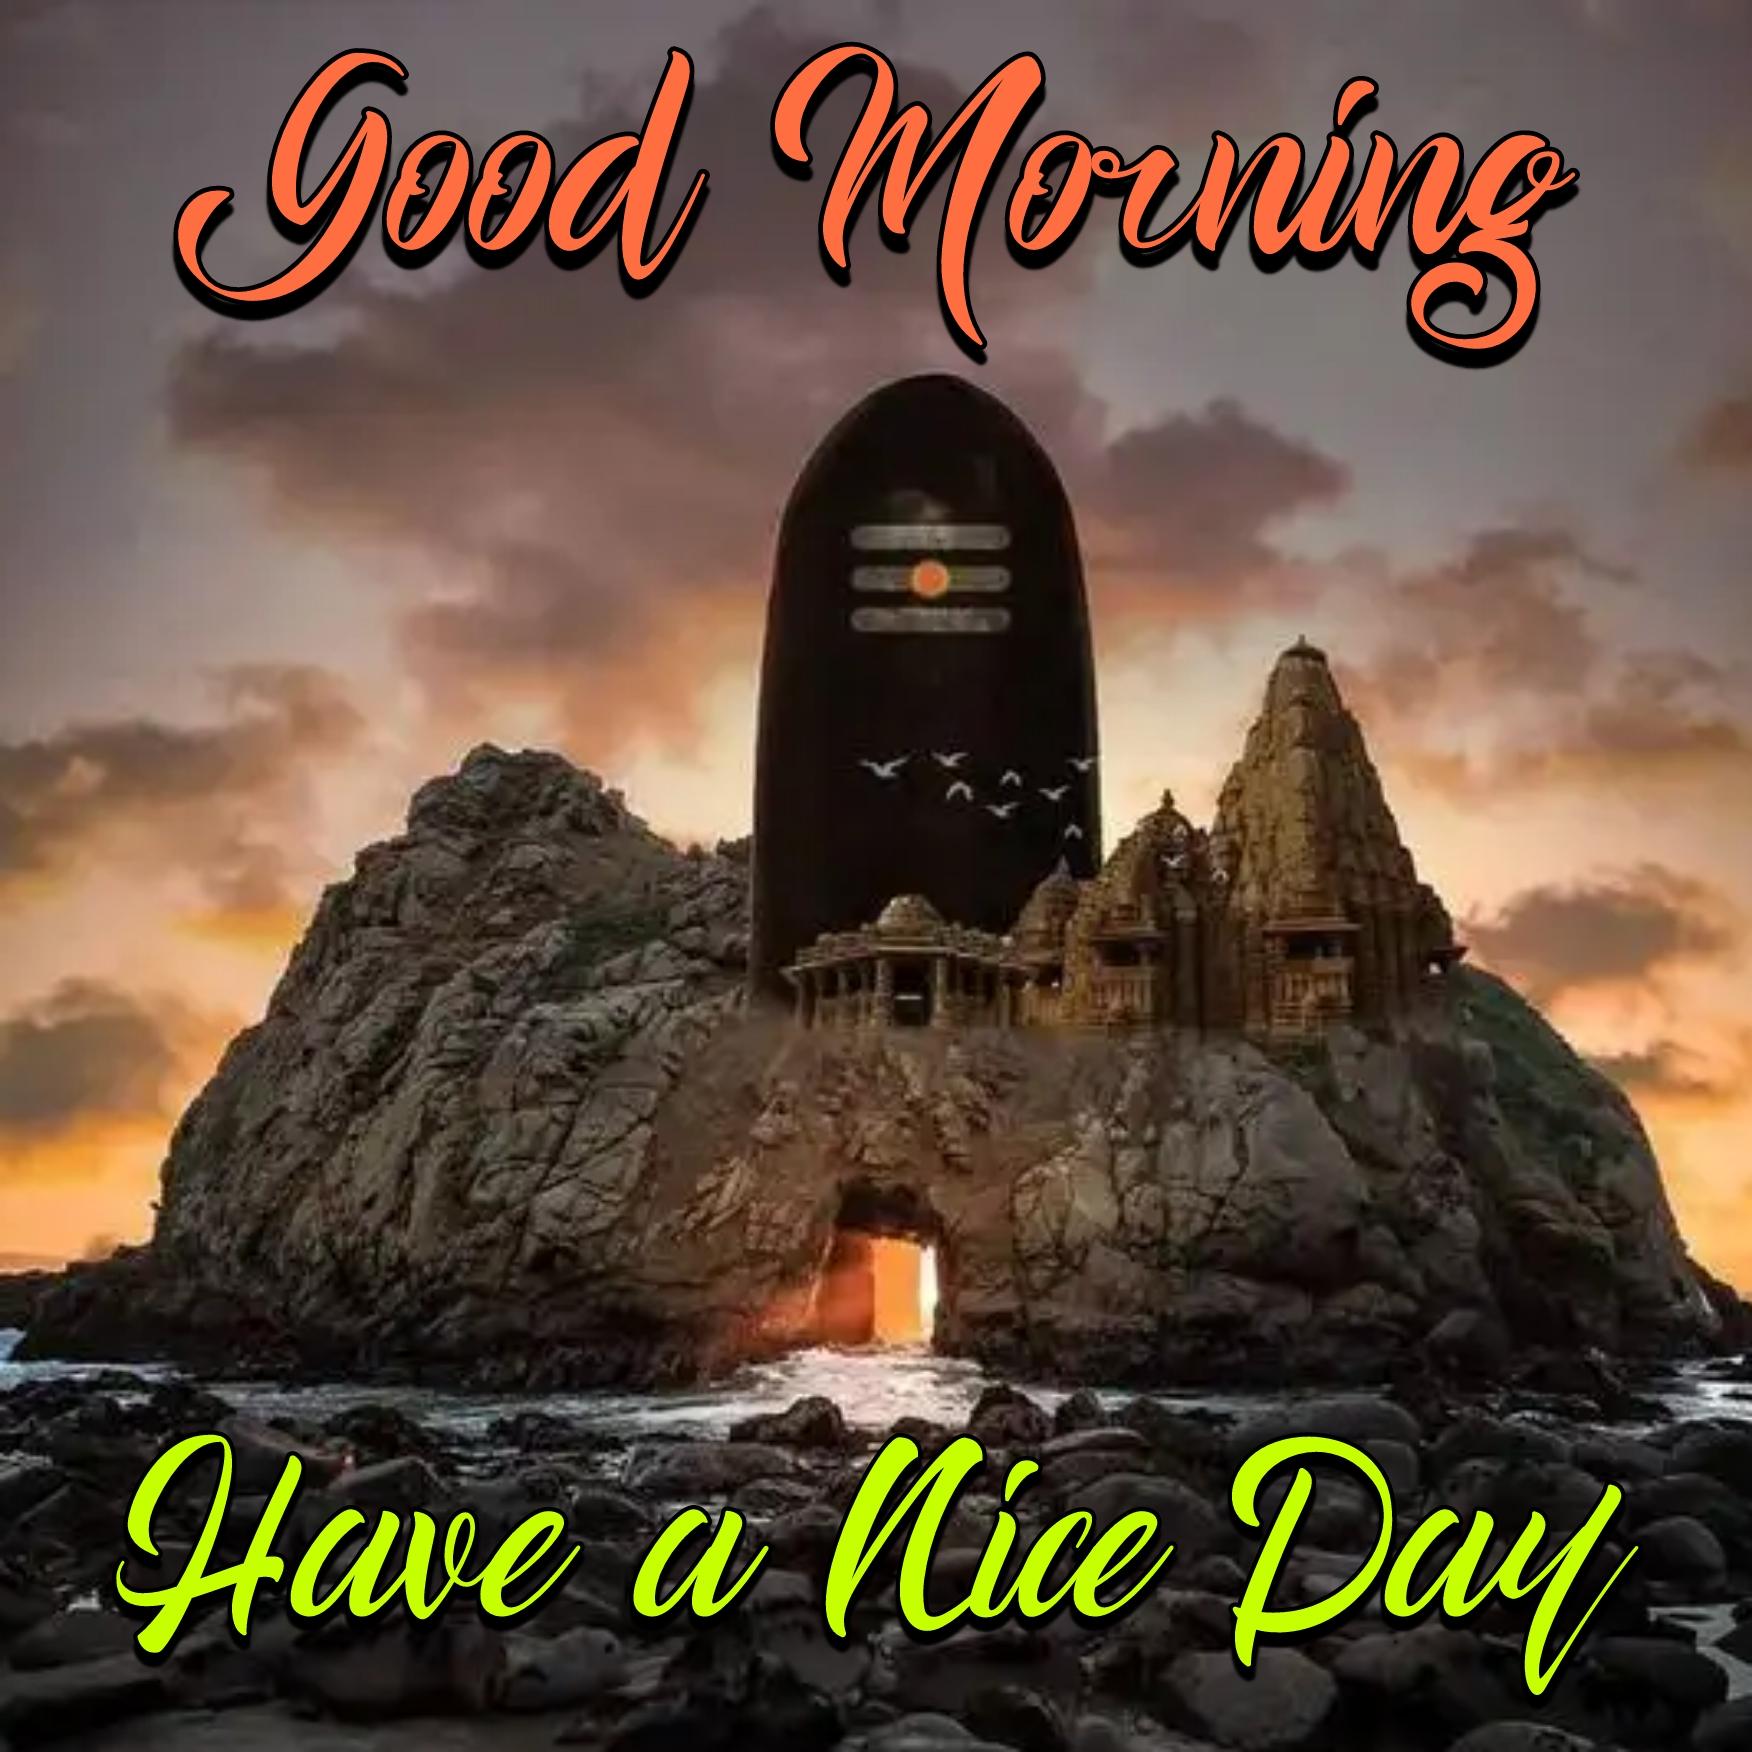 Good Morning Have a Nice Day Shivling Images